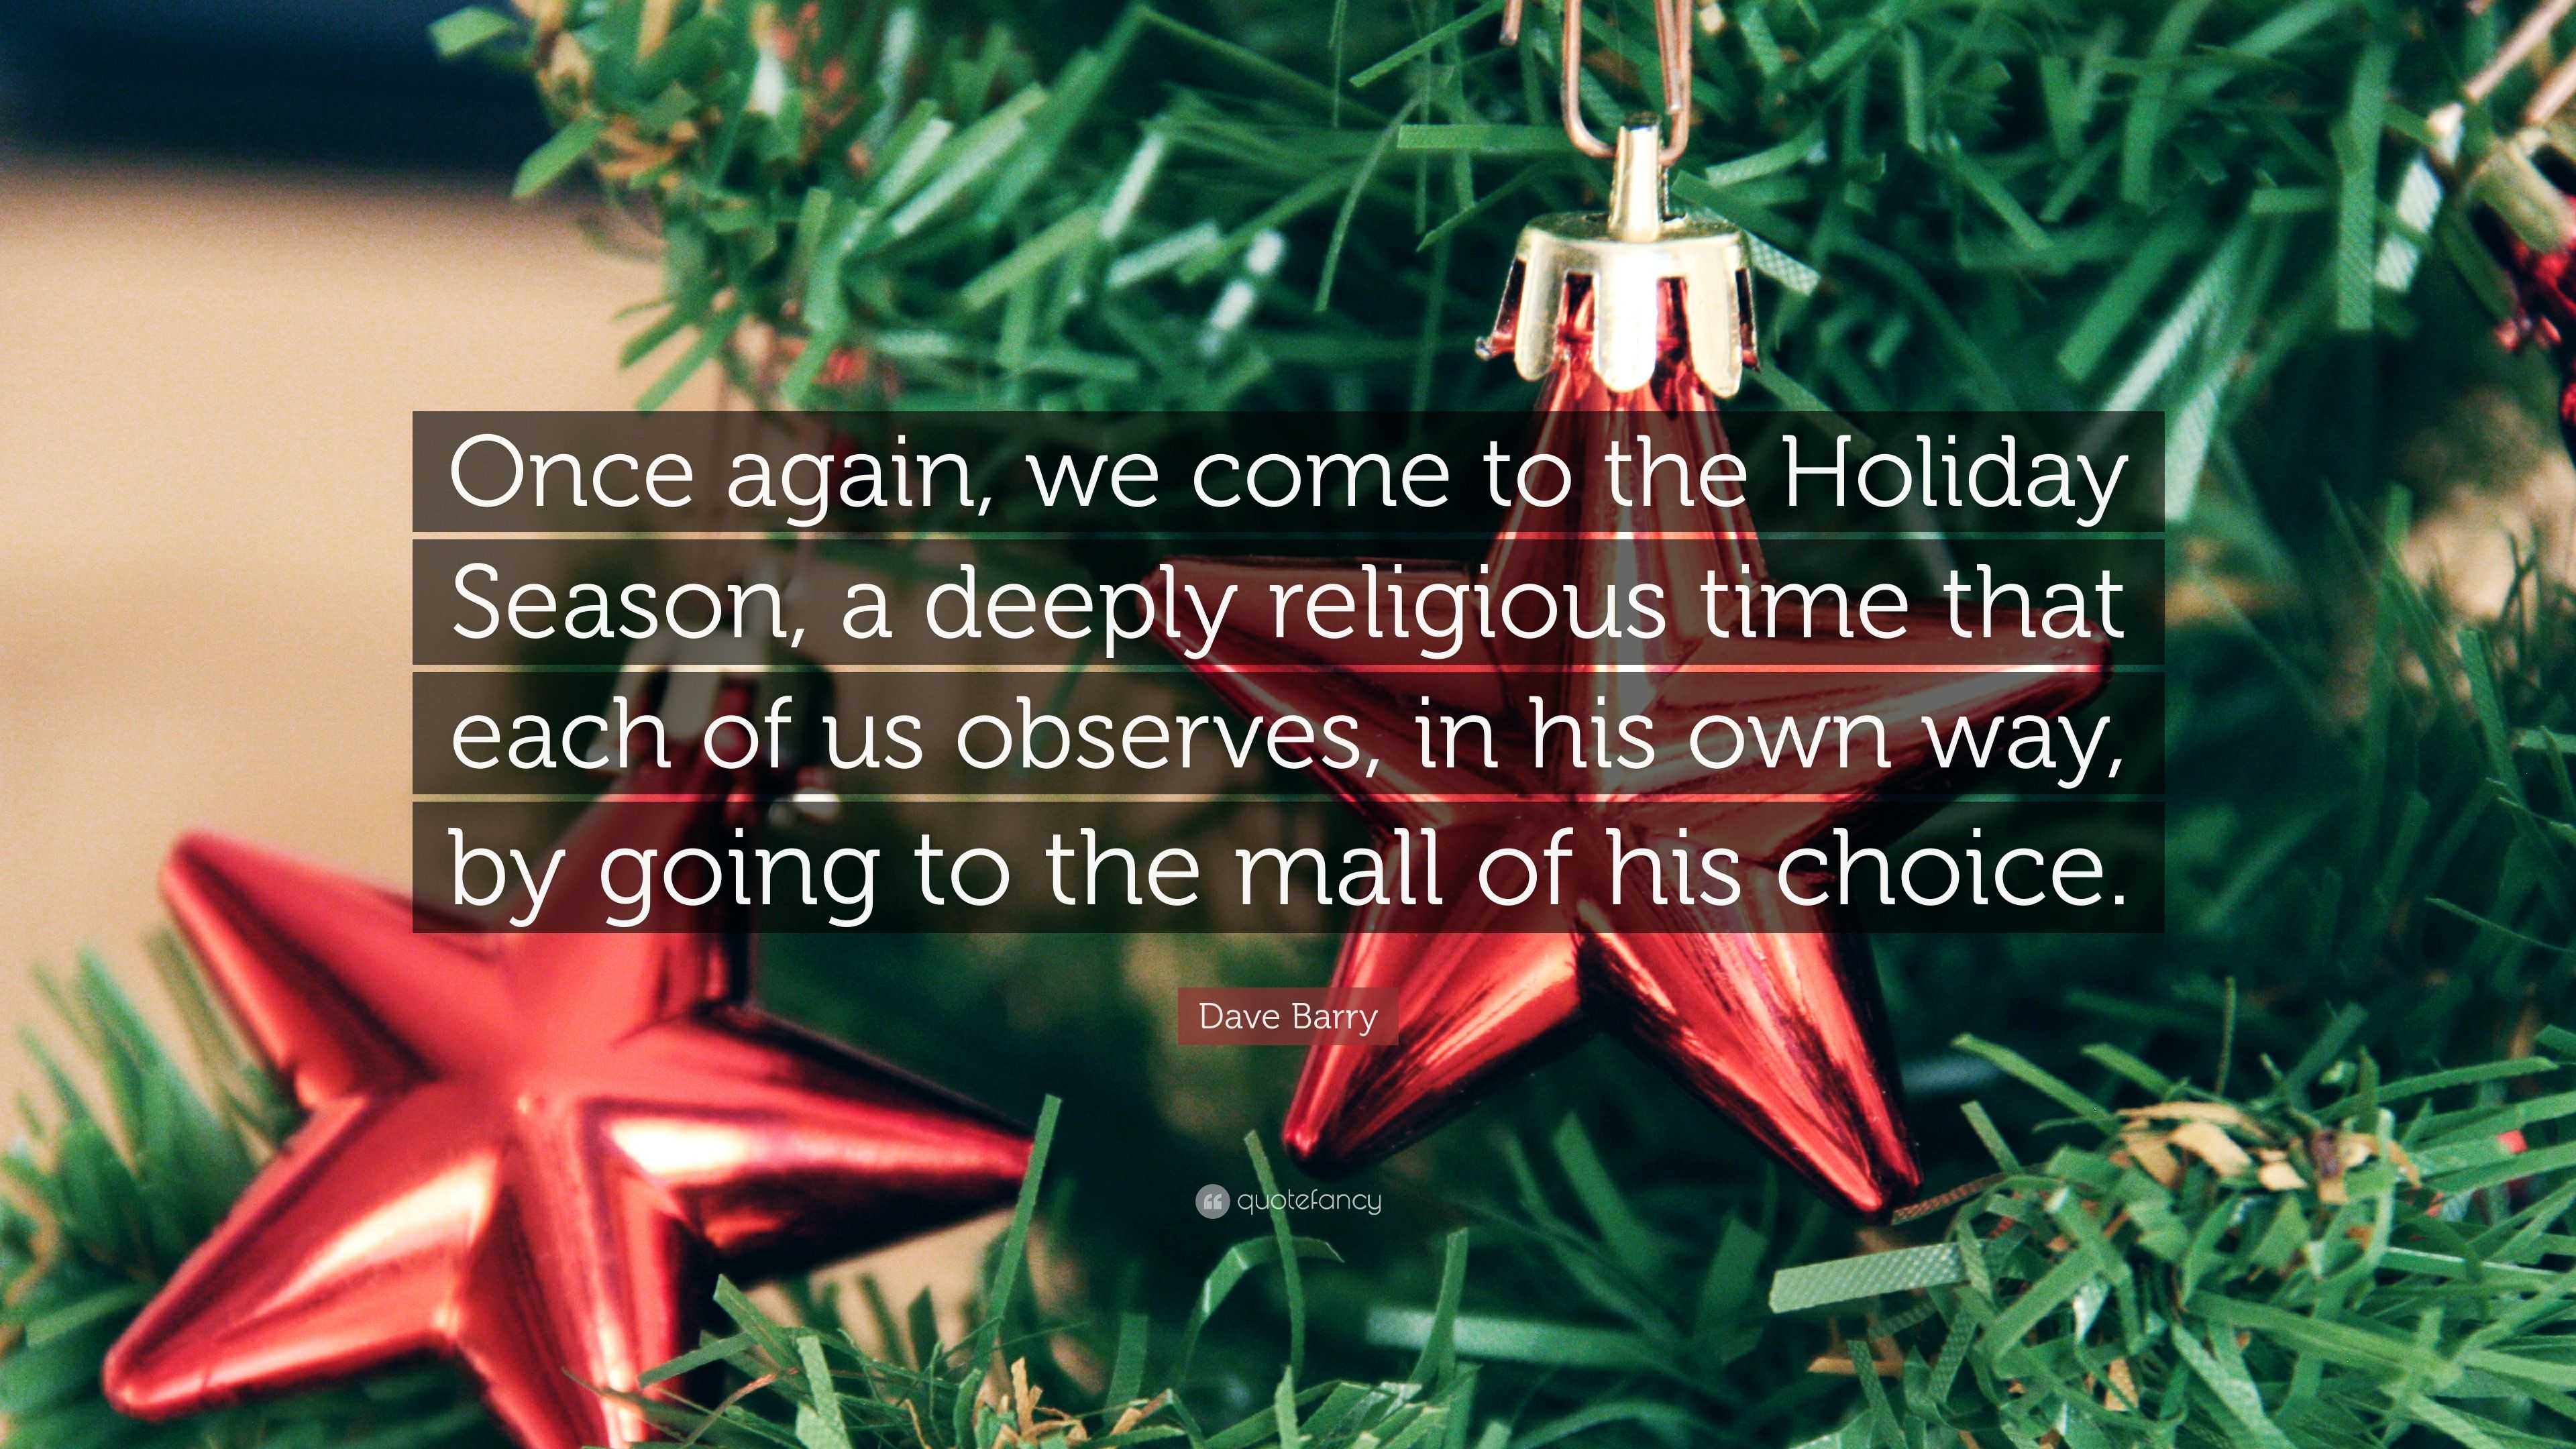 Dave Barry Quote “Once again, we come to the Holiday Season, a deeply